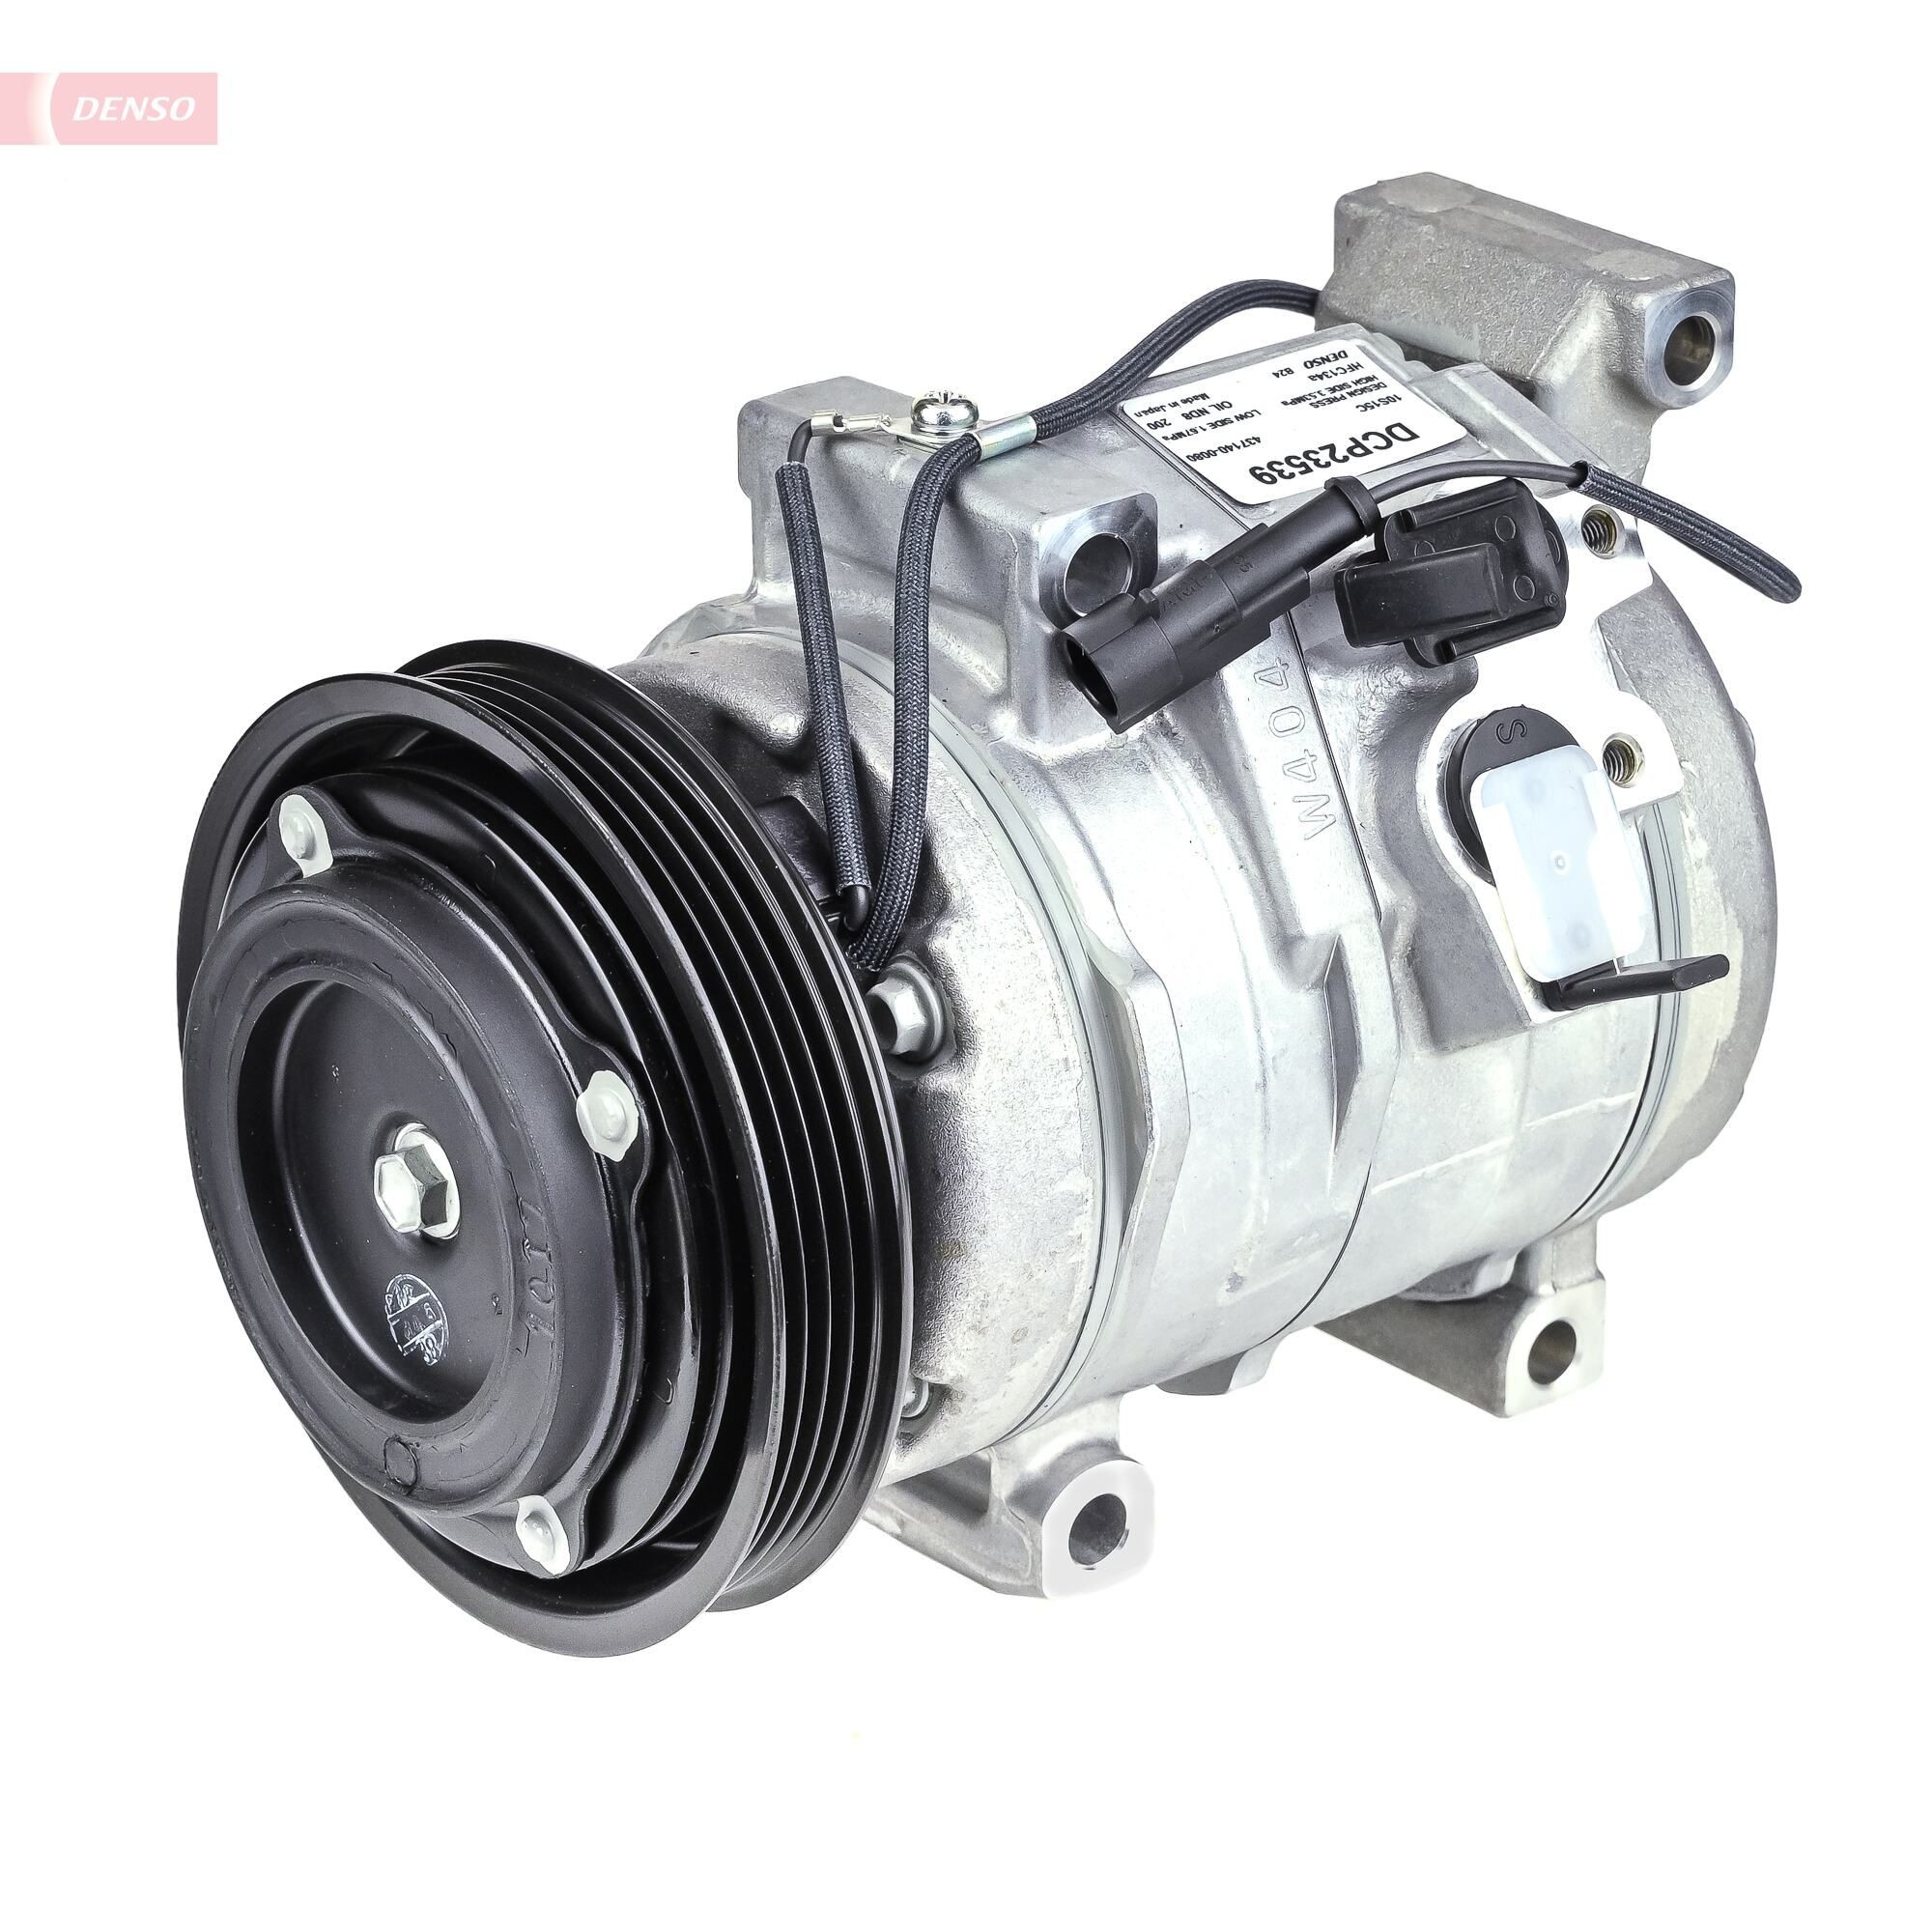 DENSO 10S15C, 12V, PAG 46, R 134a, with magnetic clutch Belt Pulley Ø: 120mm, Number of grooves: 4 AC compressor DCP23539 buy